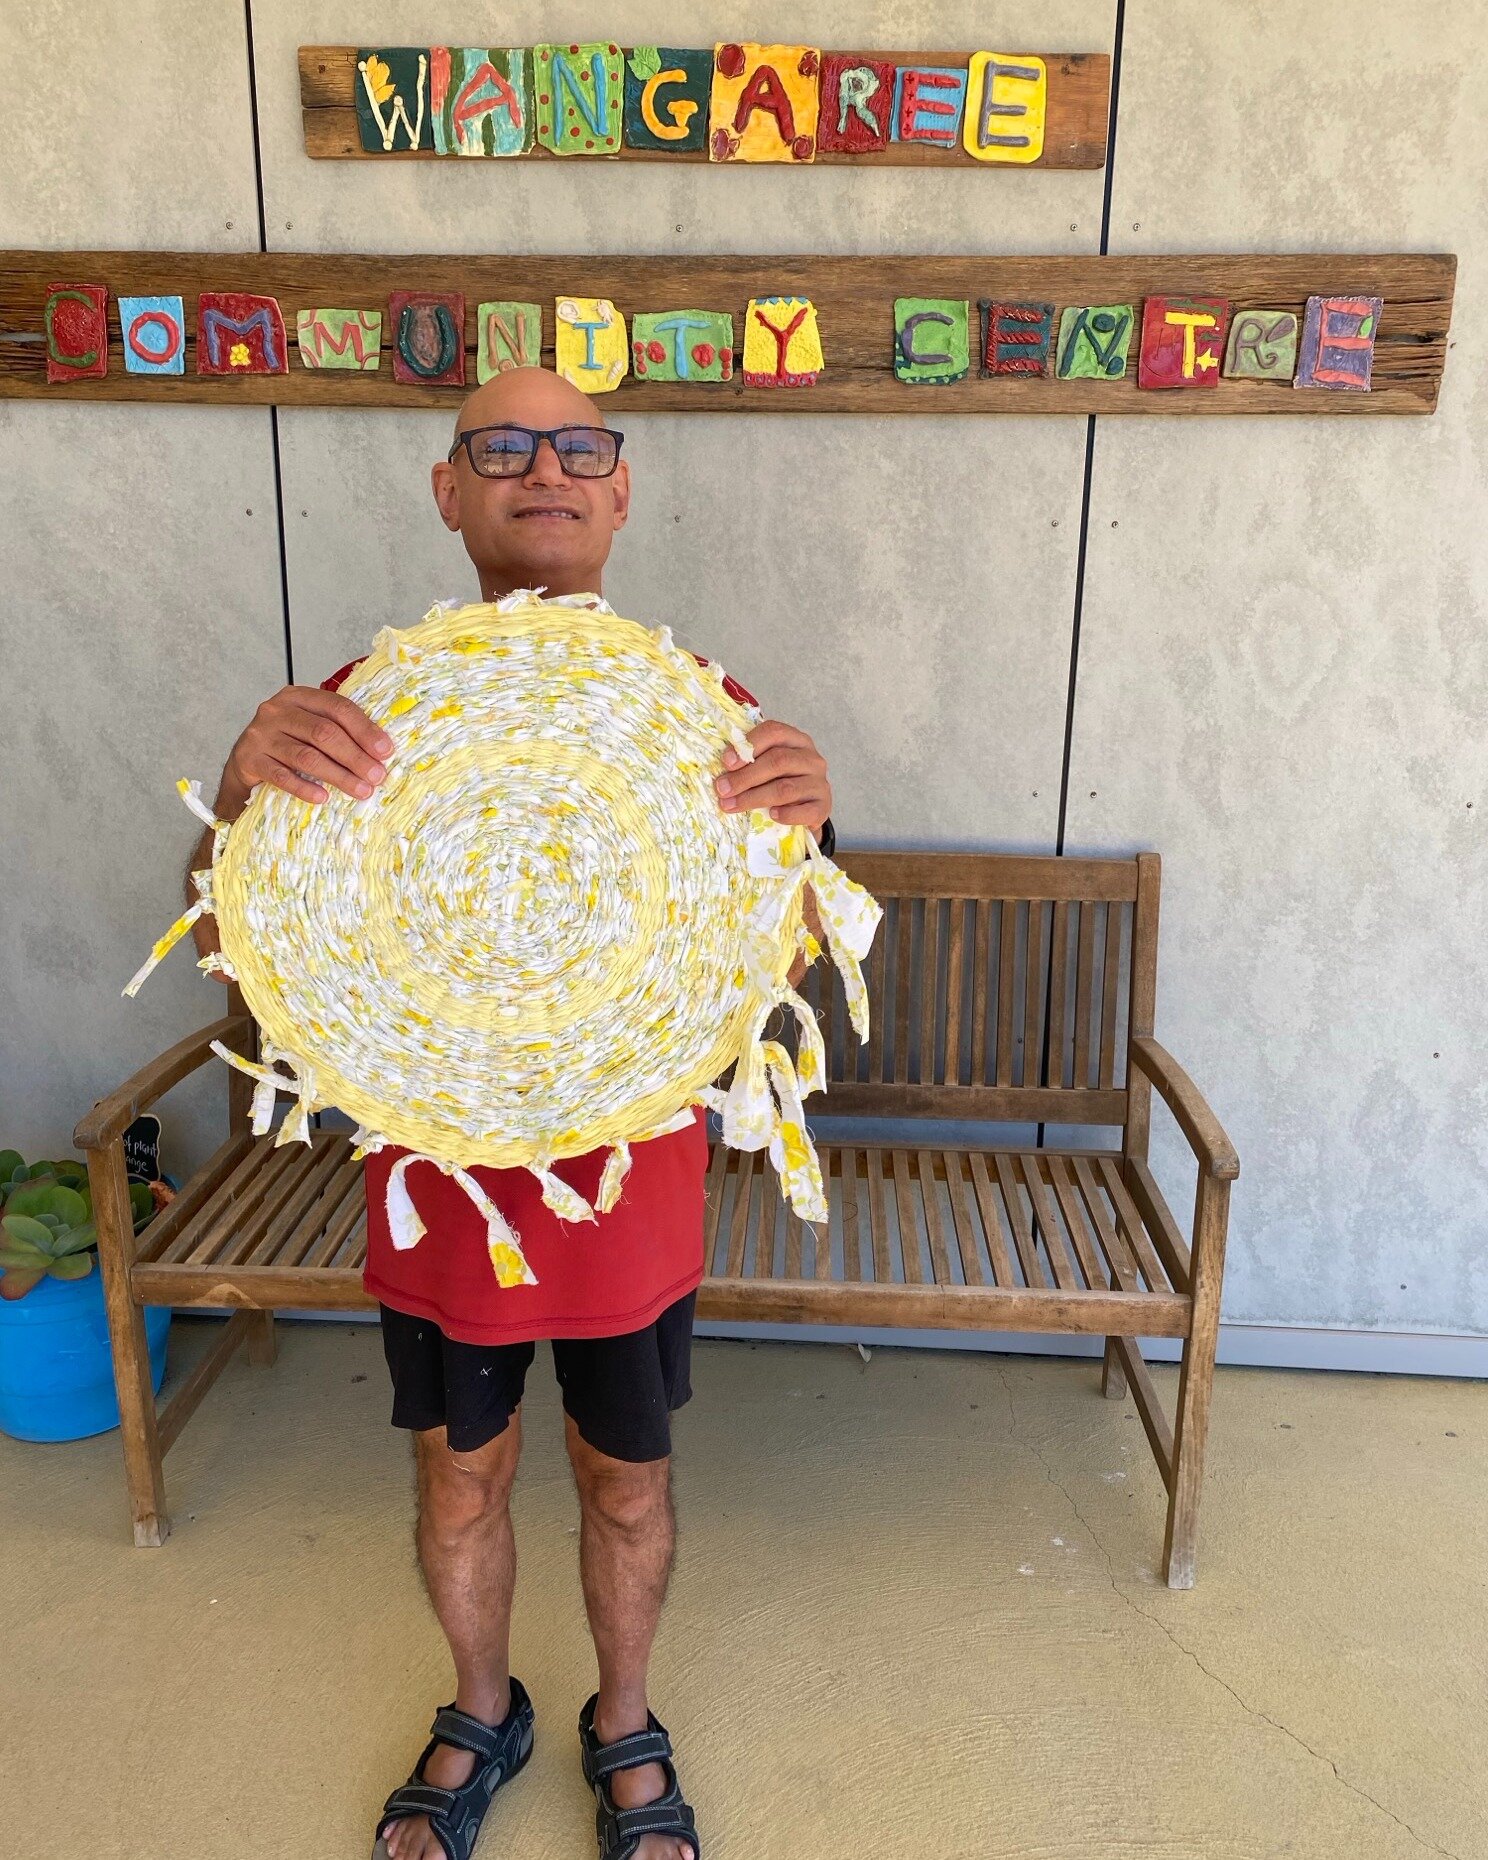 Anthony and his rug: he says: &quot;I wanted to weave a rag-rug for country... my artsworker showed me a rug she started and told me about the project. I wanted to learn to weave and finish it. I used torn up old sheets. Sometimes we would get mixed 